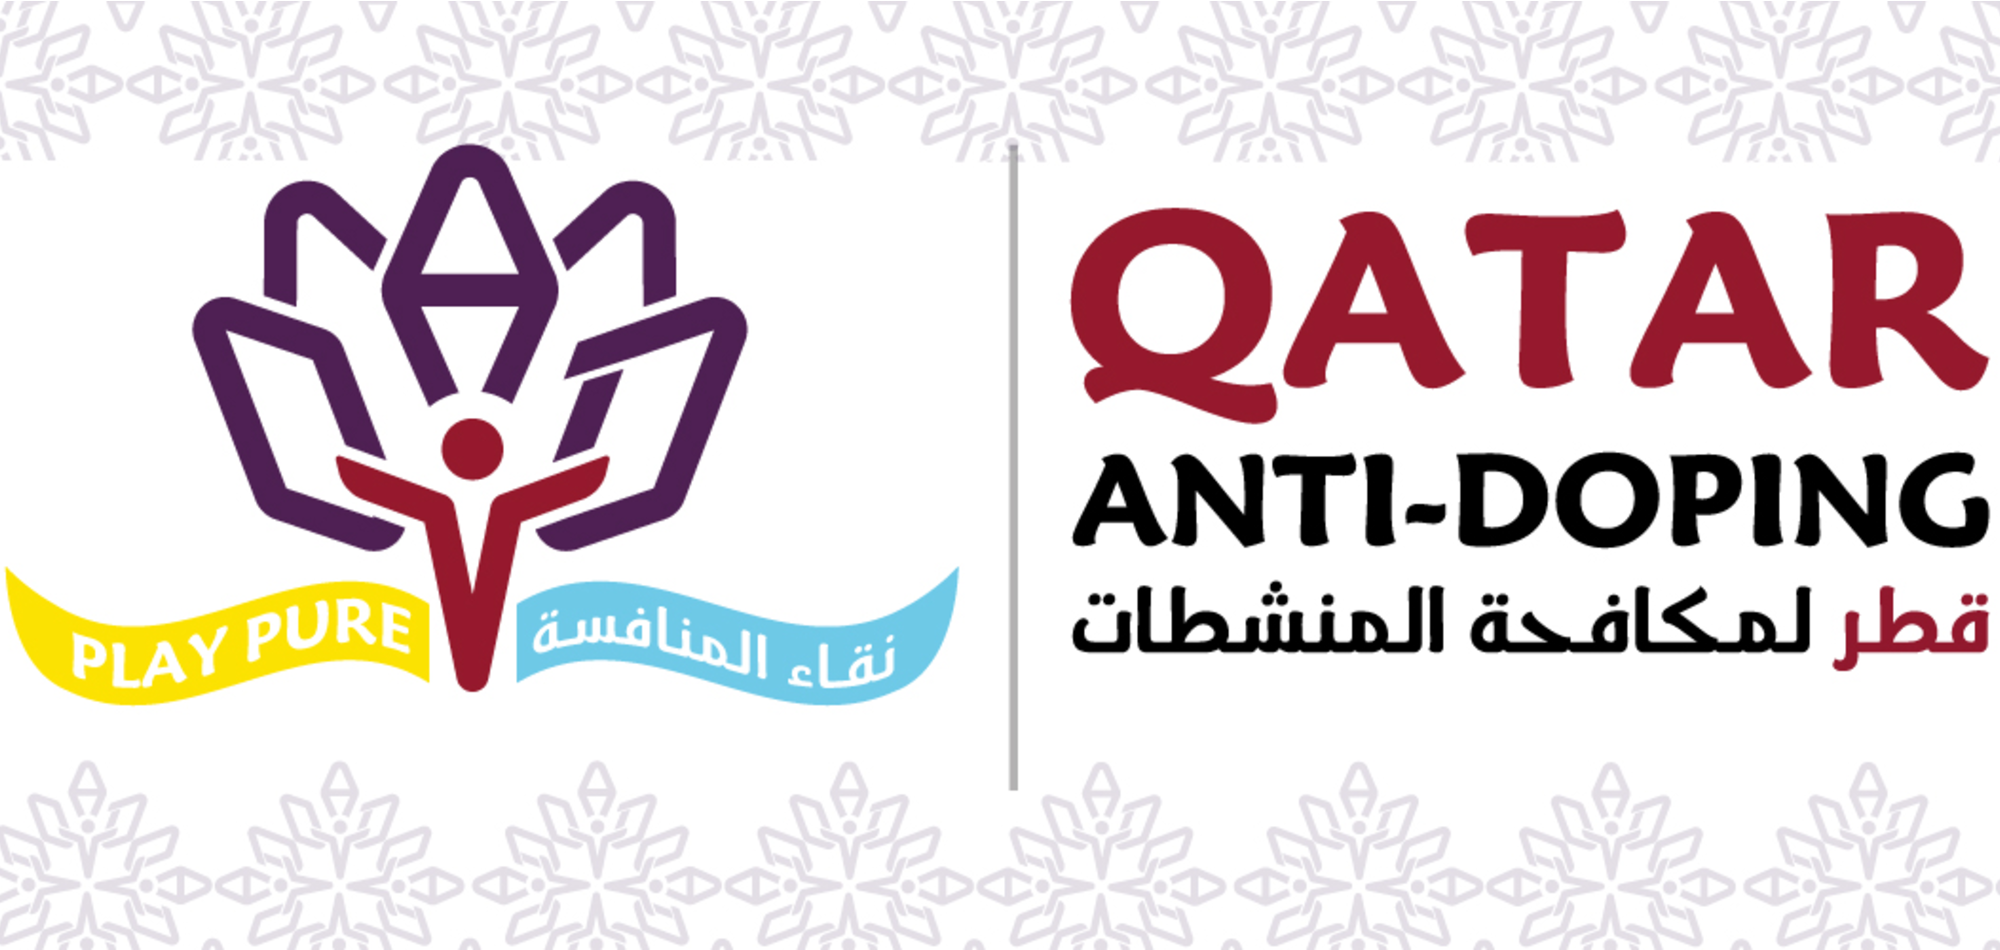 Qatar Anti-Doping Commission launches its new brand